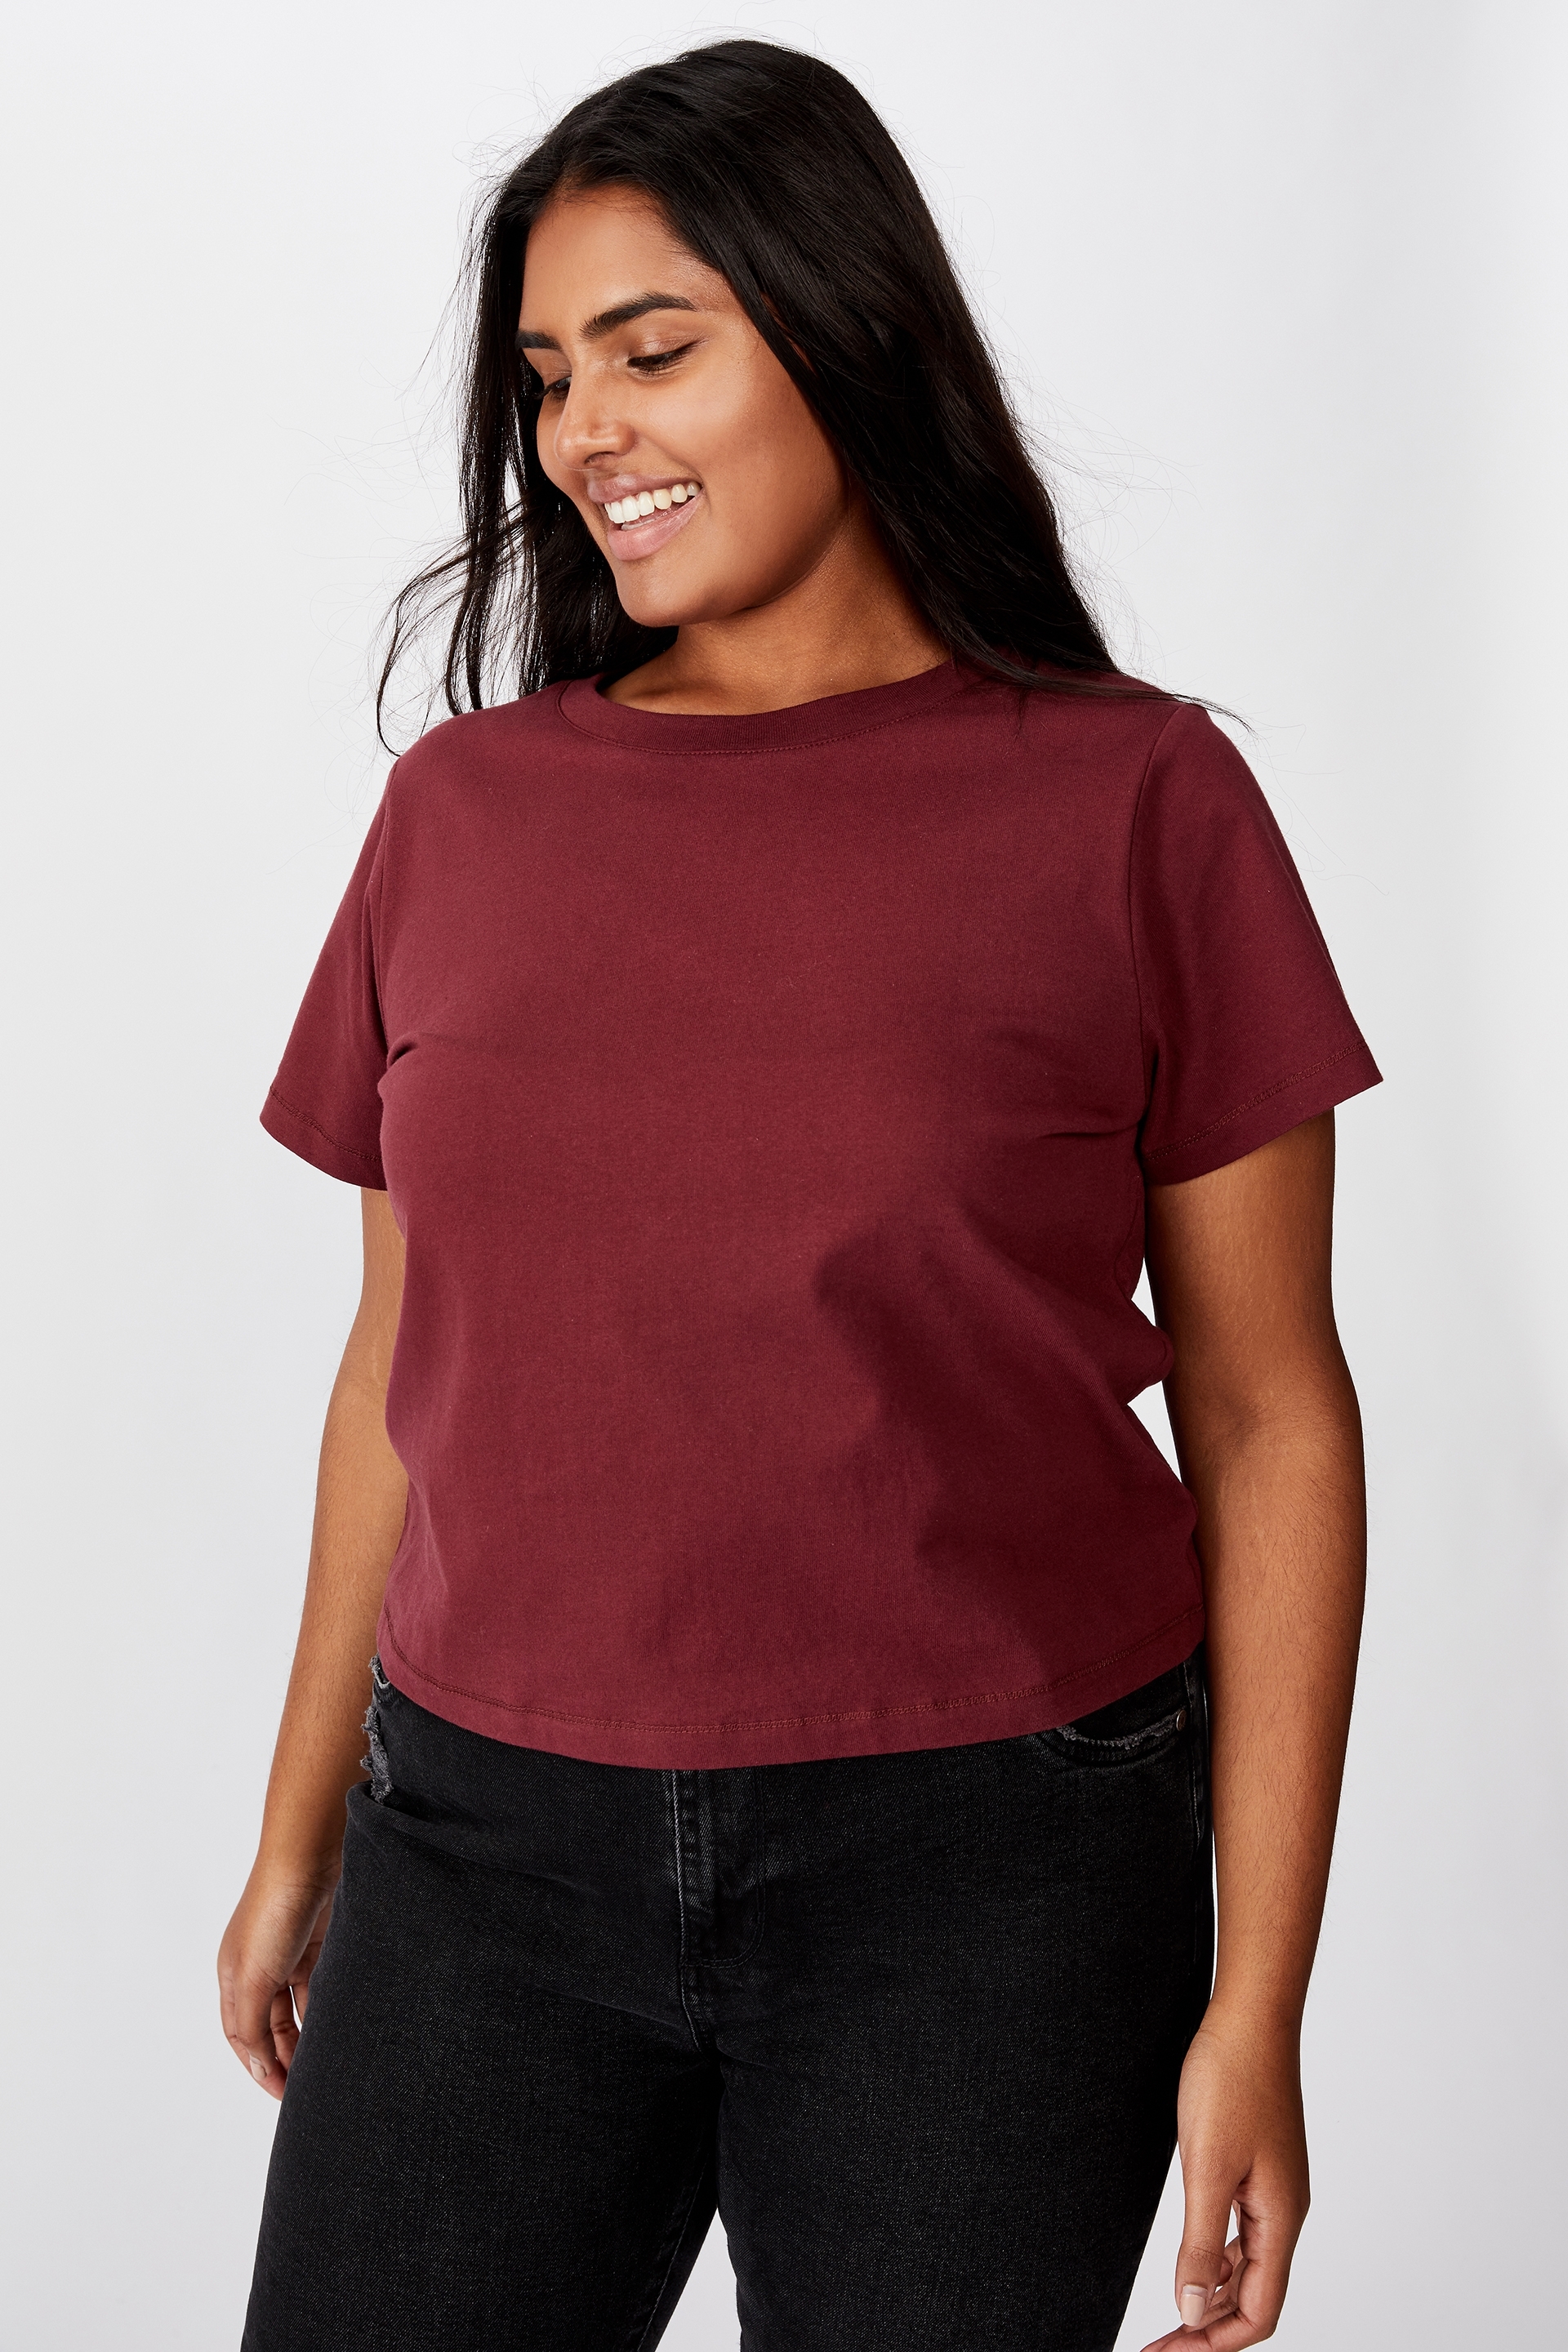 Cotton On Women - Curve The One Baby Tee - Red mahongany